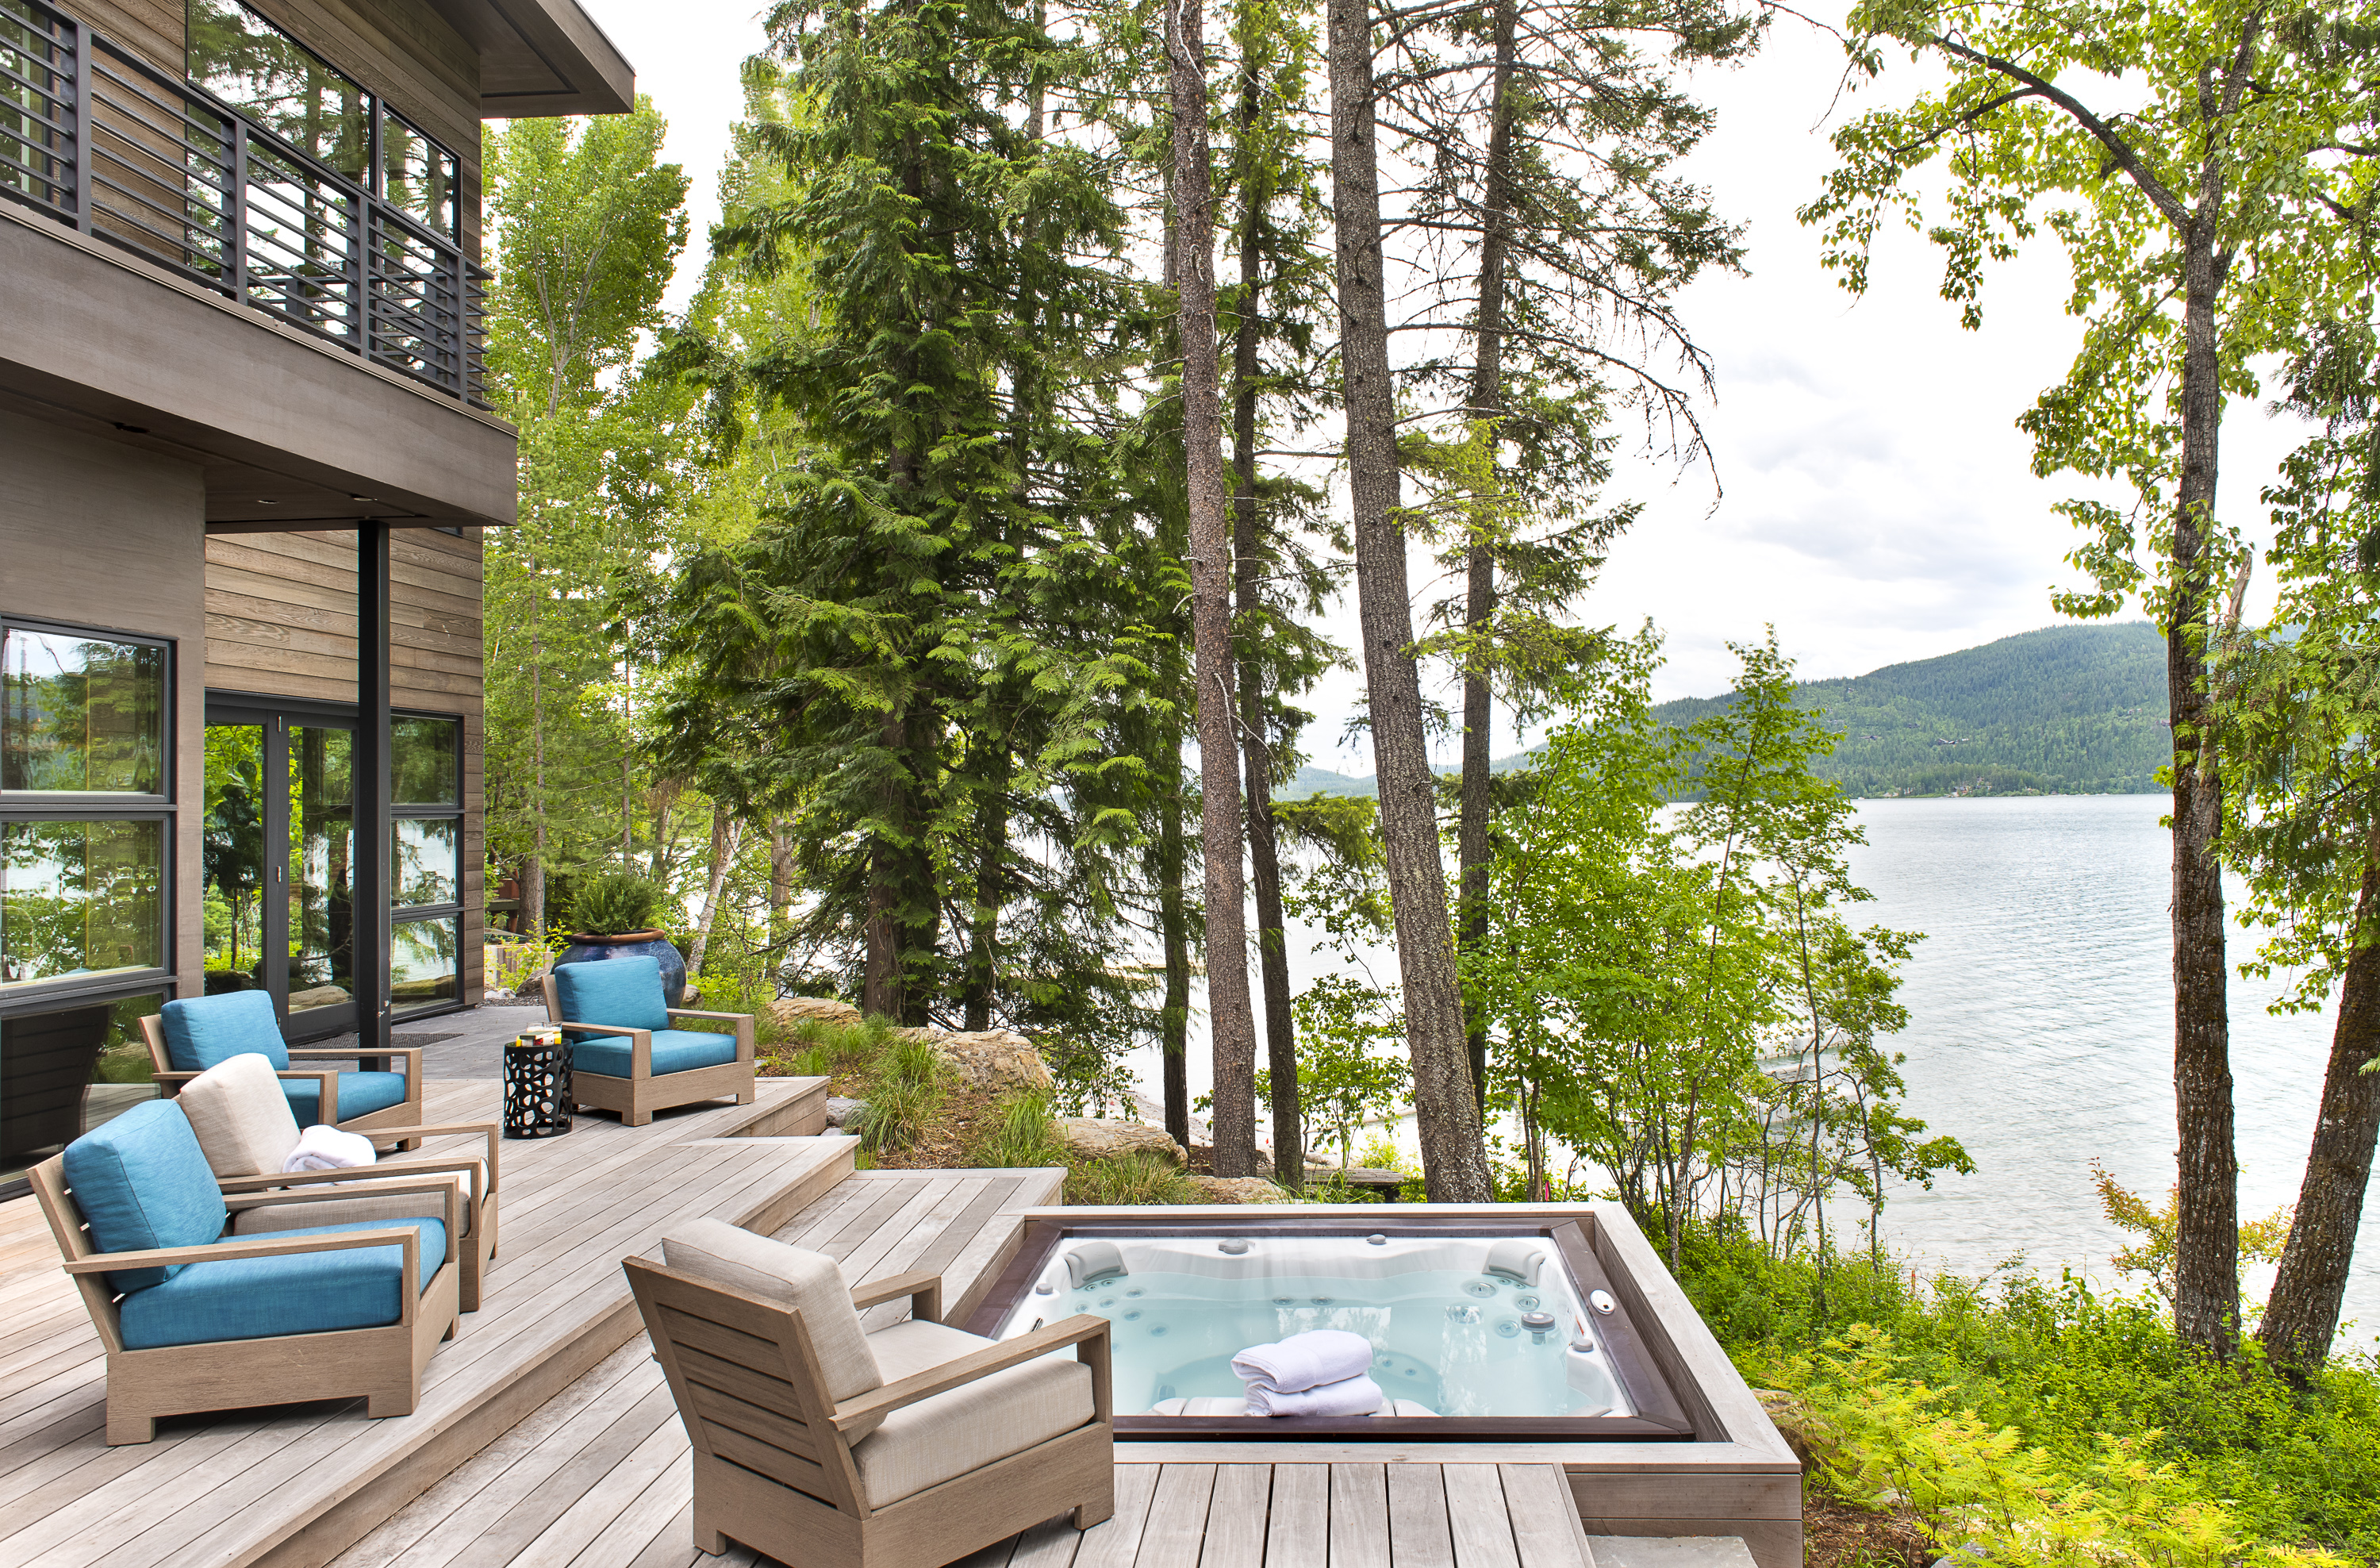 The leading luxury real estate brand in Montana, PureWest Christie's International Real Estate is here to bring your wildest Montana dreams to life. – PureWest Lake Team